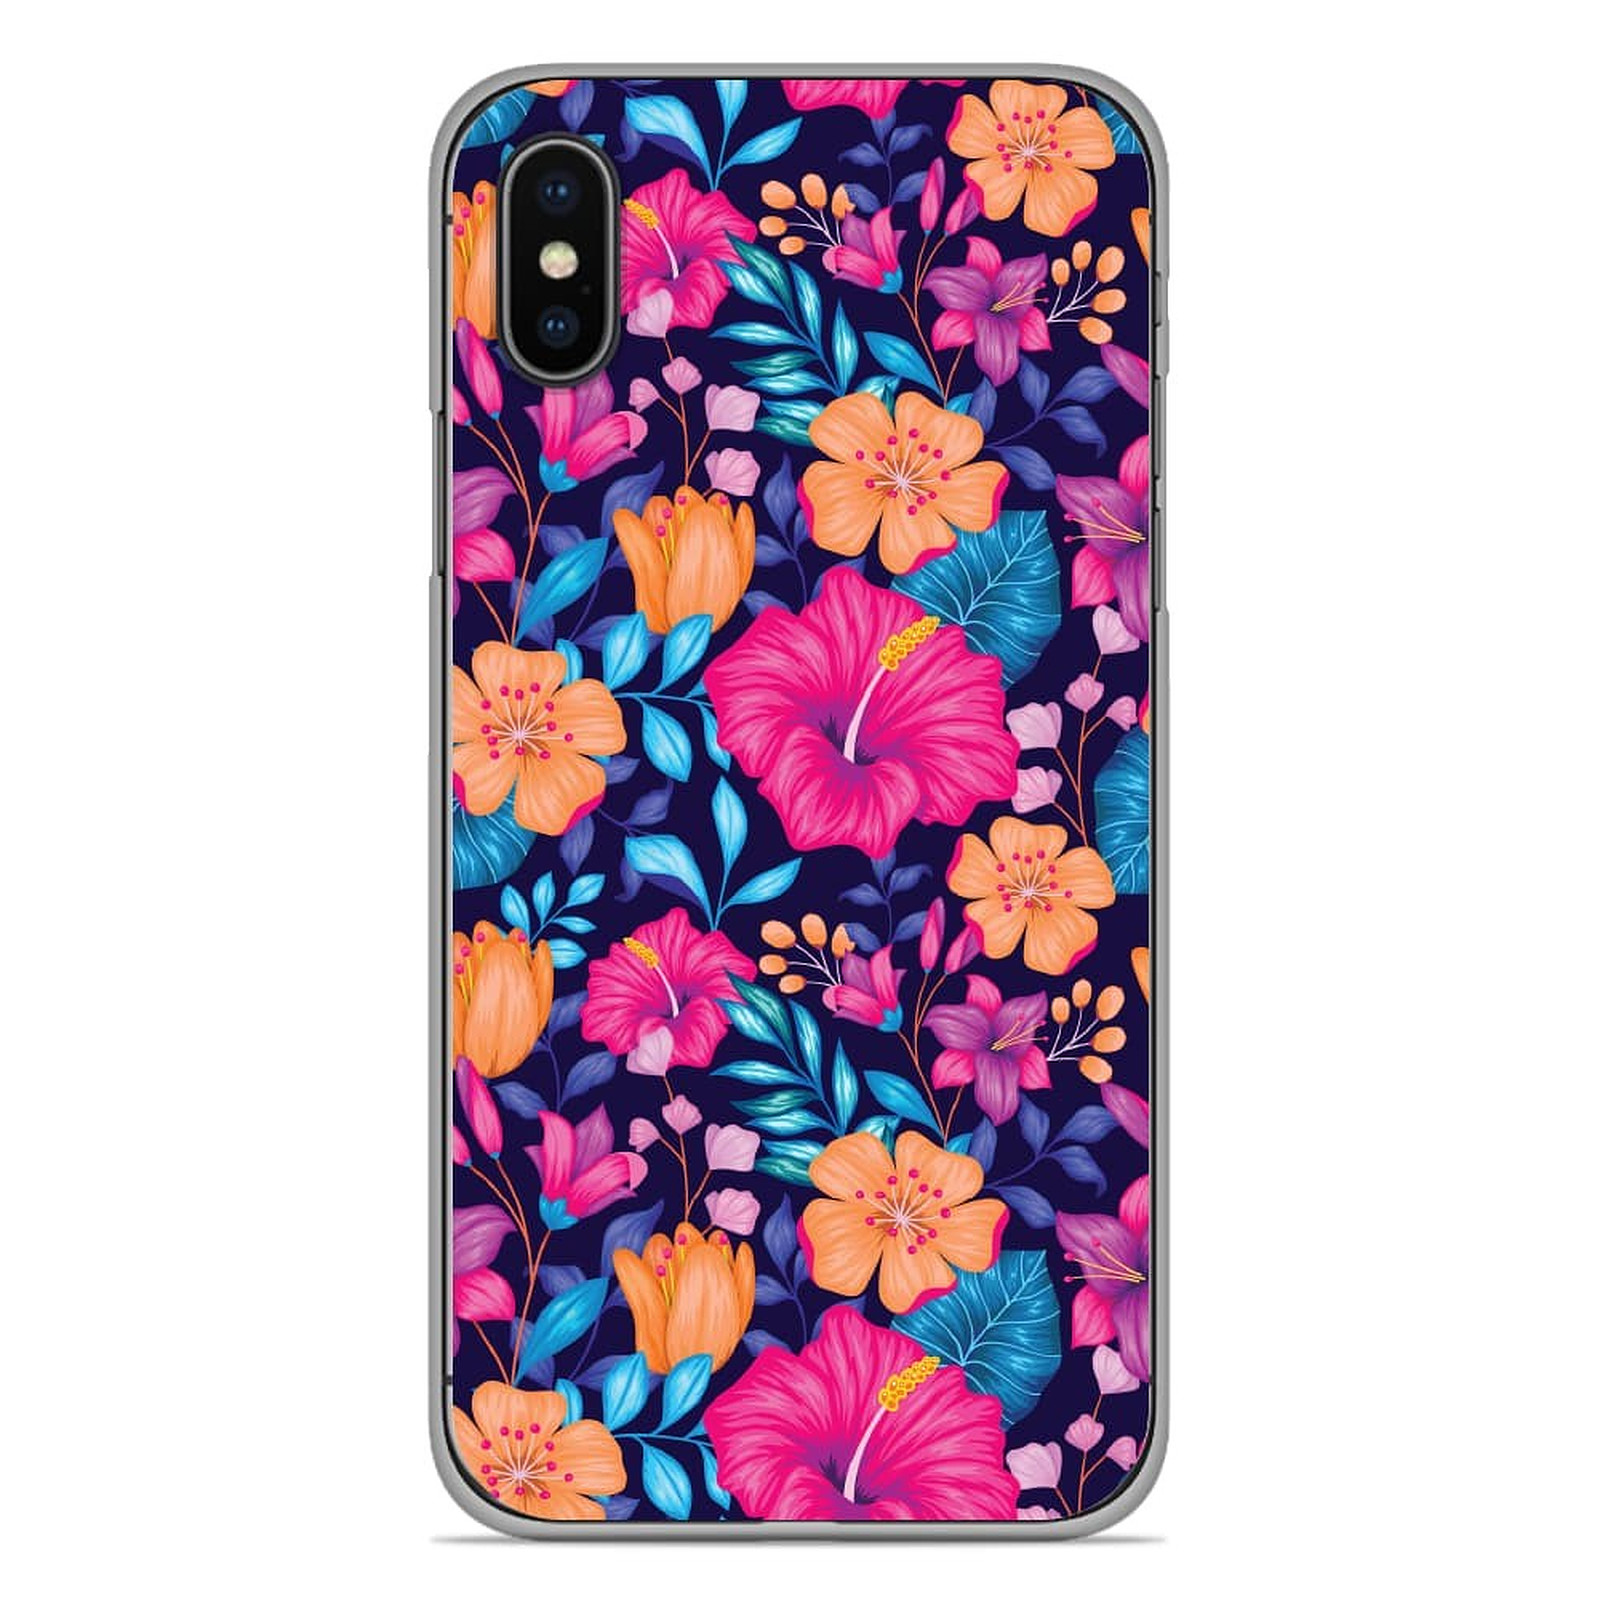 1001 Coques Coque silicone gel Apple iPhone X / XS motif Fleurs Exotiques - Coque telephone 1001Coques